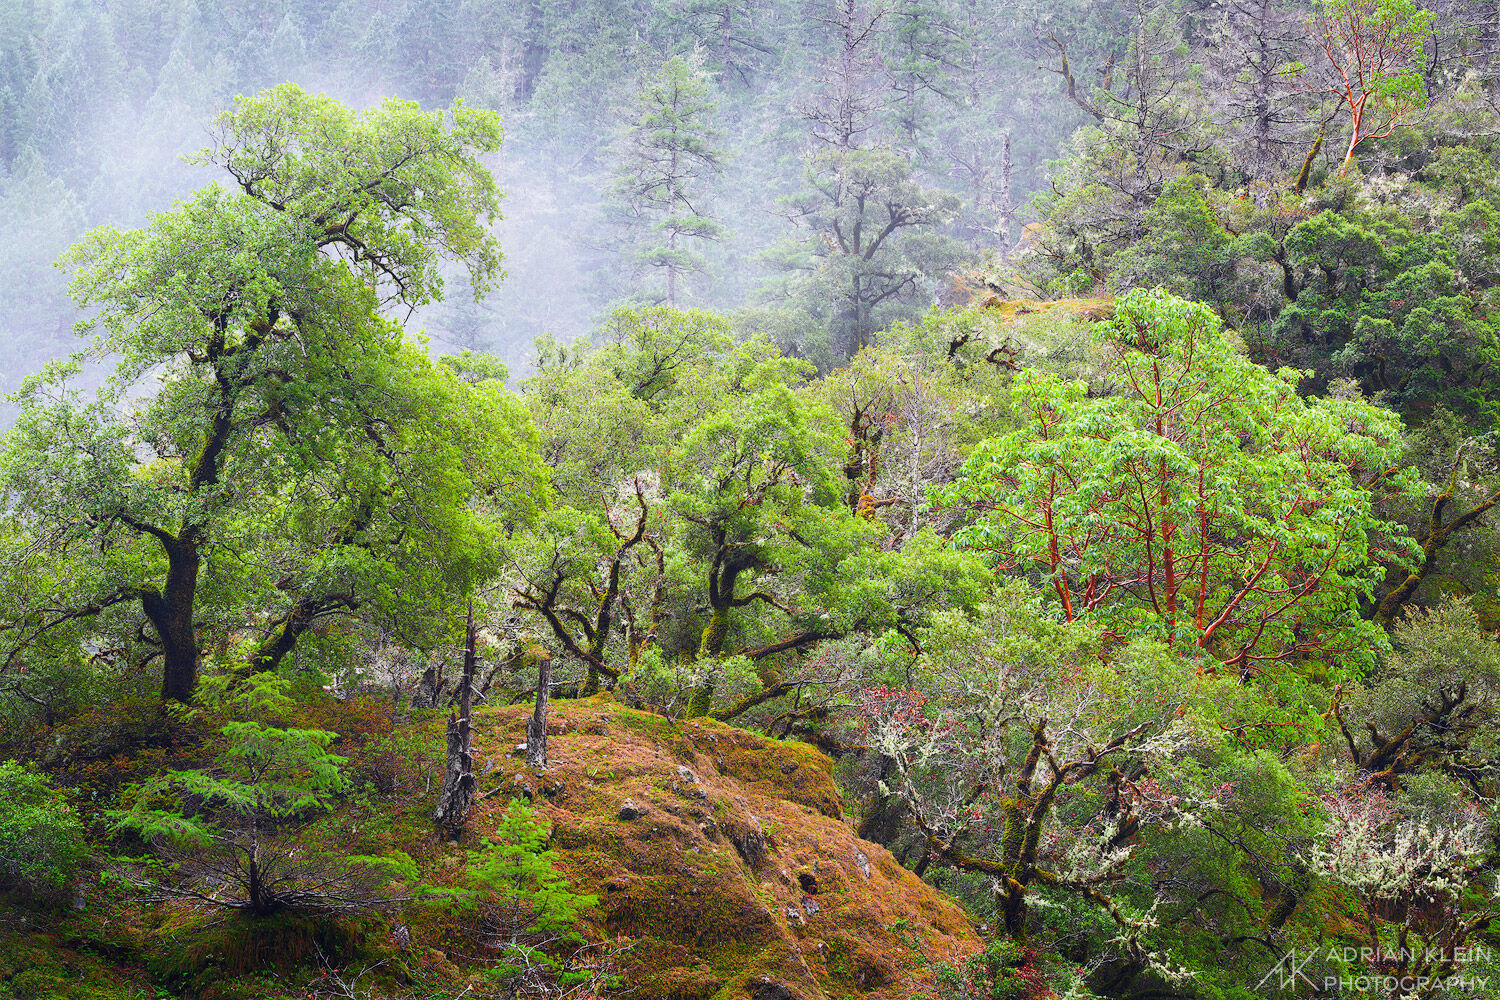 A diverse forest of trees in the cold wet winter fog. Near Redwoods National Park in California.